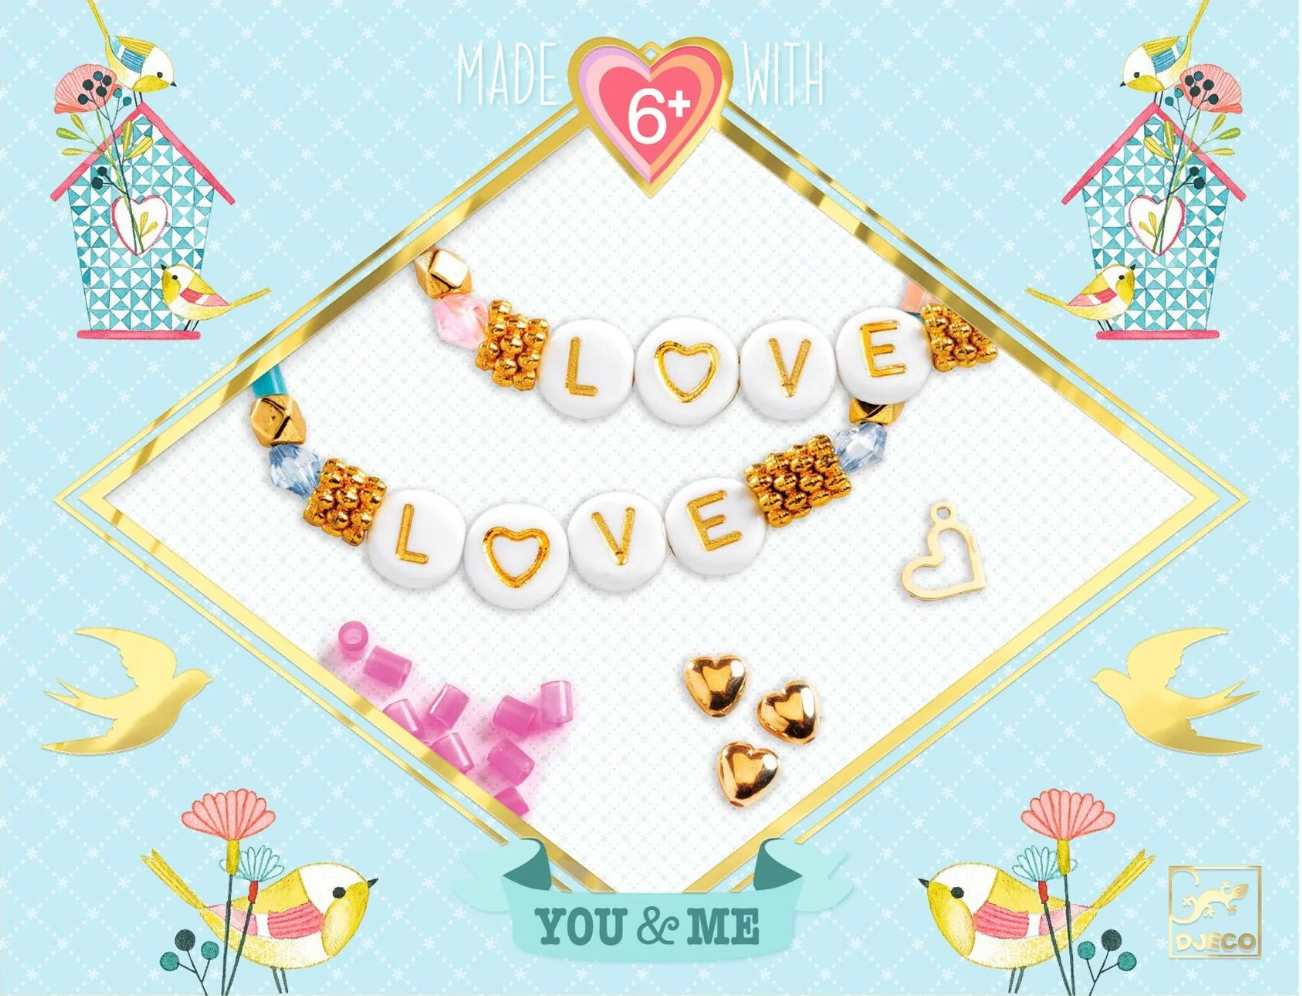 Love Letters Beads Jewelry Kit